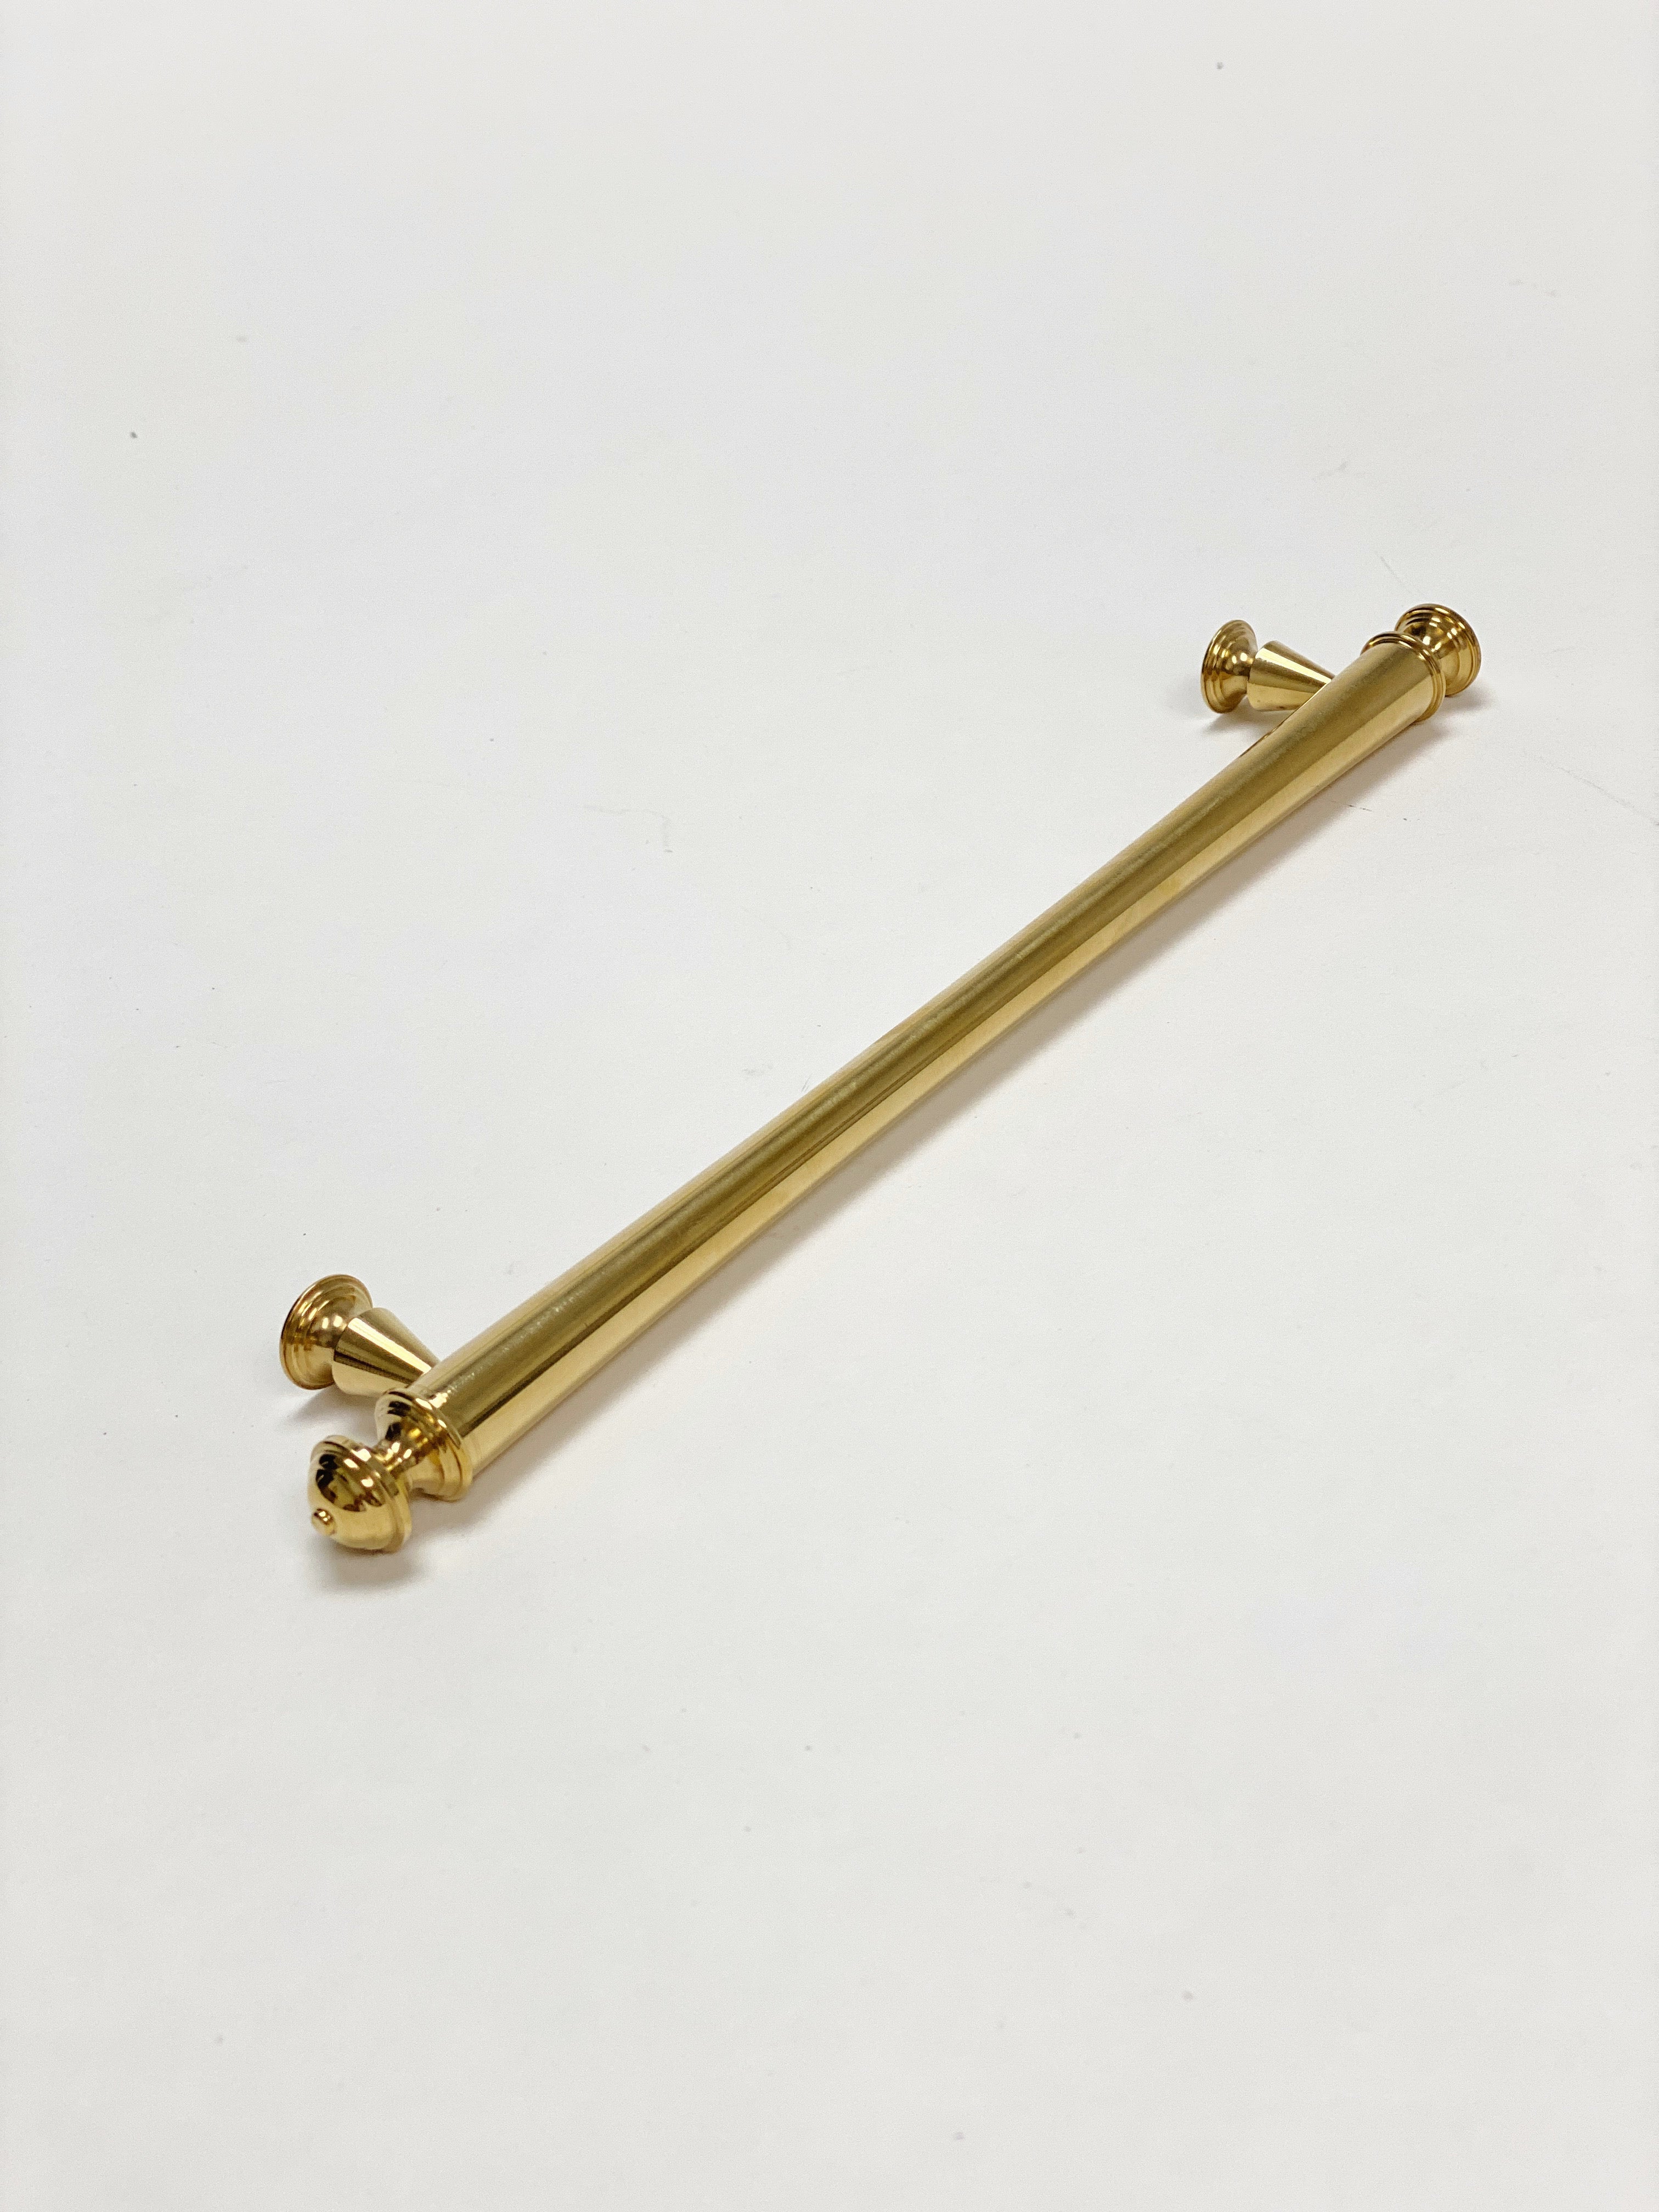 Unlacquered Brass "Emmeline" Cabinet Knobs and Drawer Pull - Industry Hardware